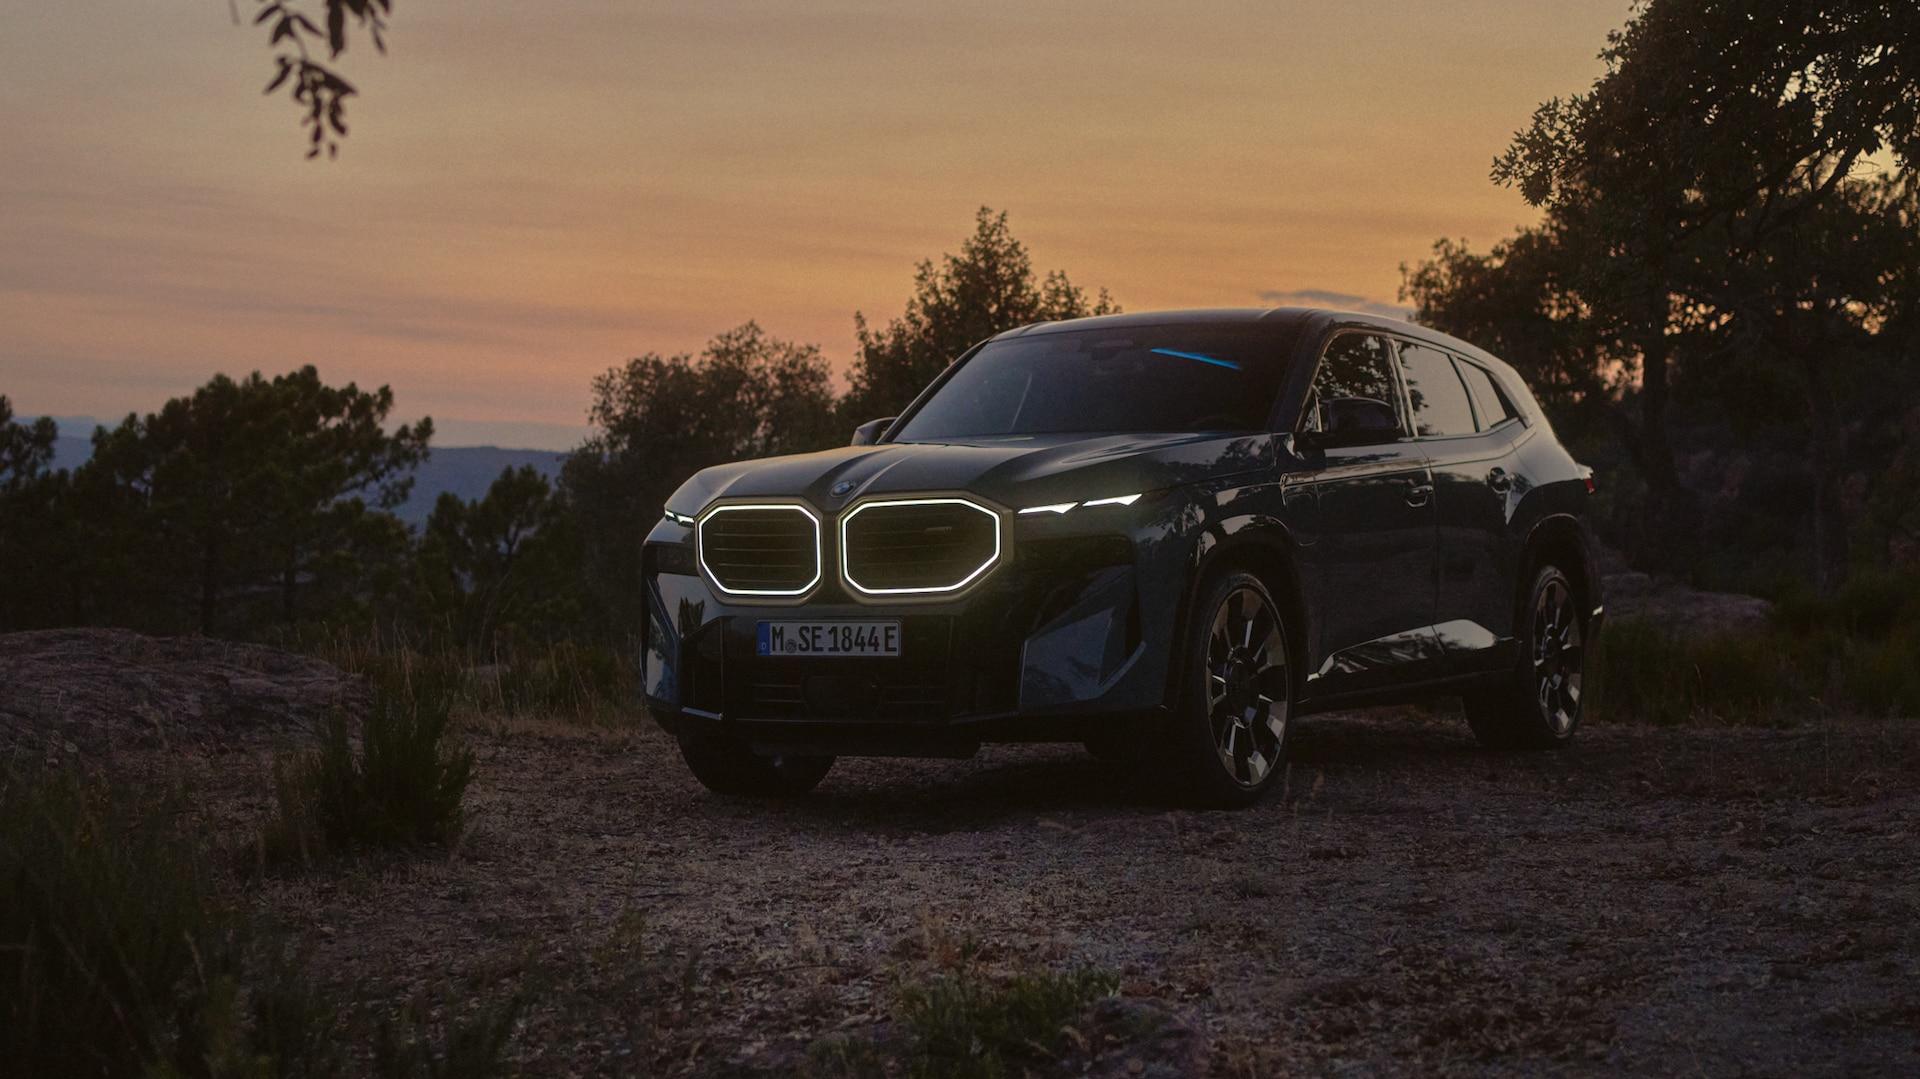 The Bmw Xm Is Here And M S First Bespoke Suv A Hp Thumper